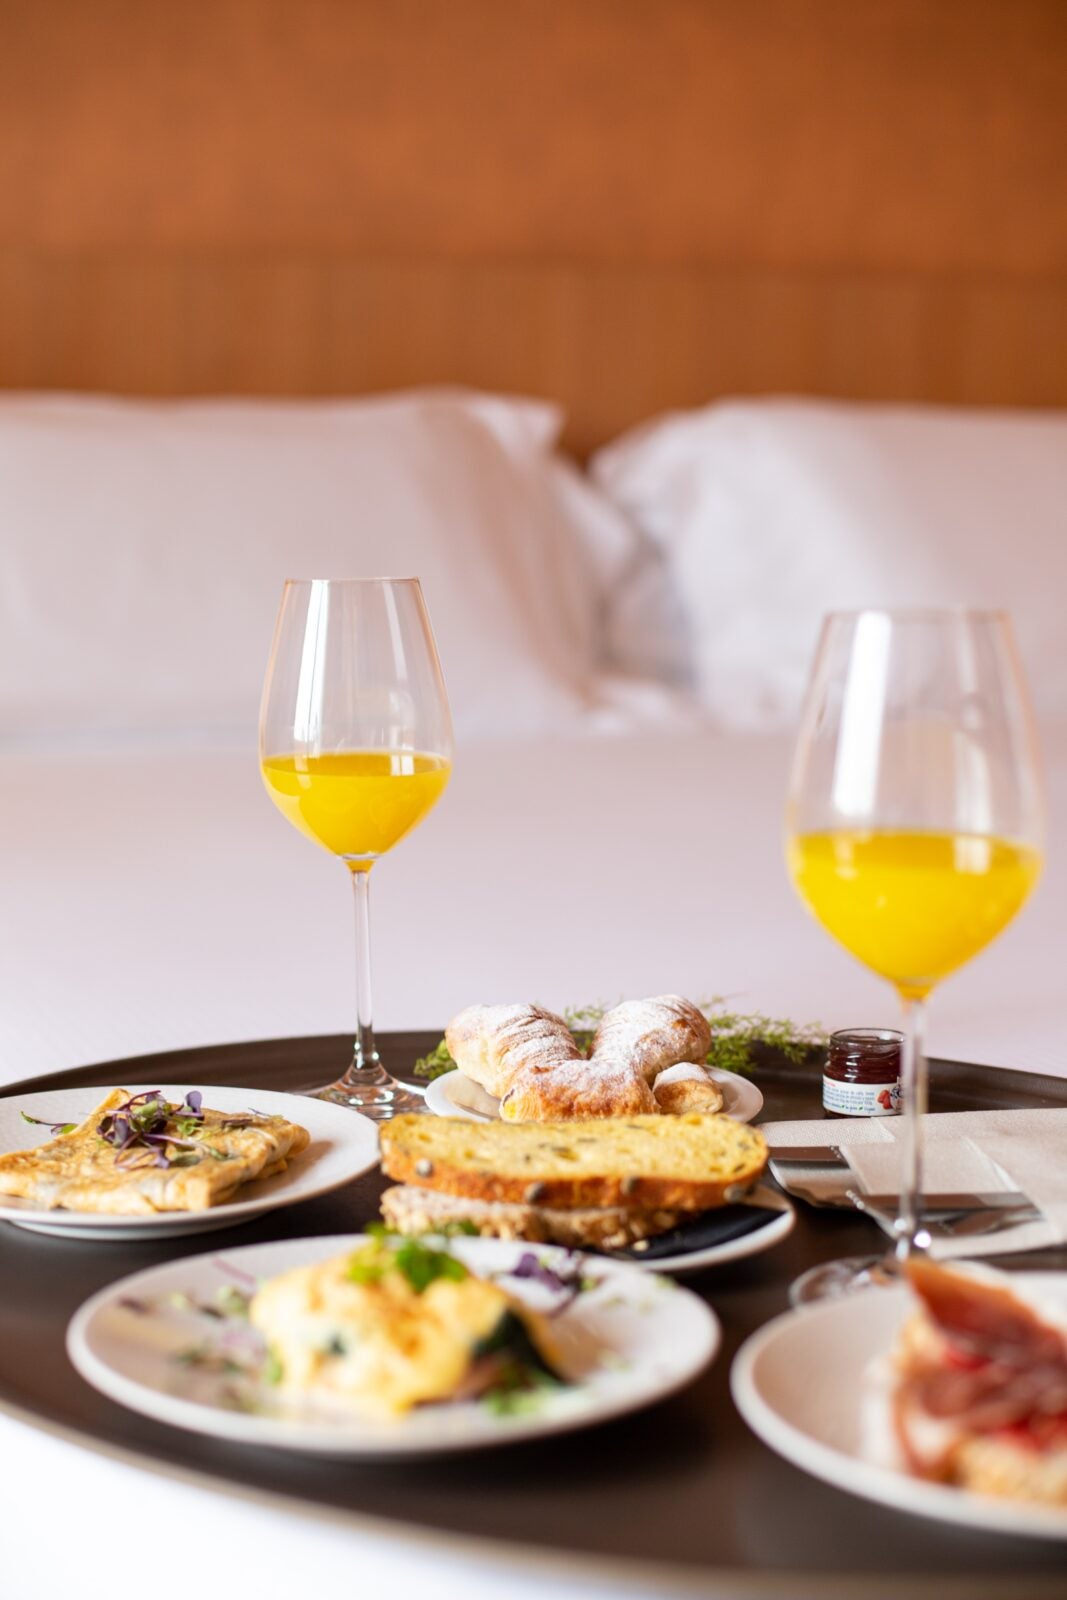 Multiple plates of breakfast foods are set on a black serving platter along with two wine glasses of orange liquid.